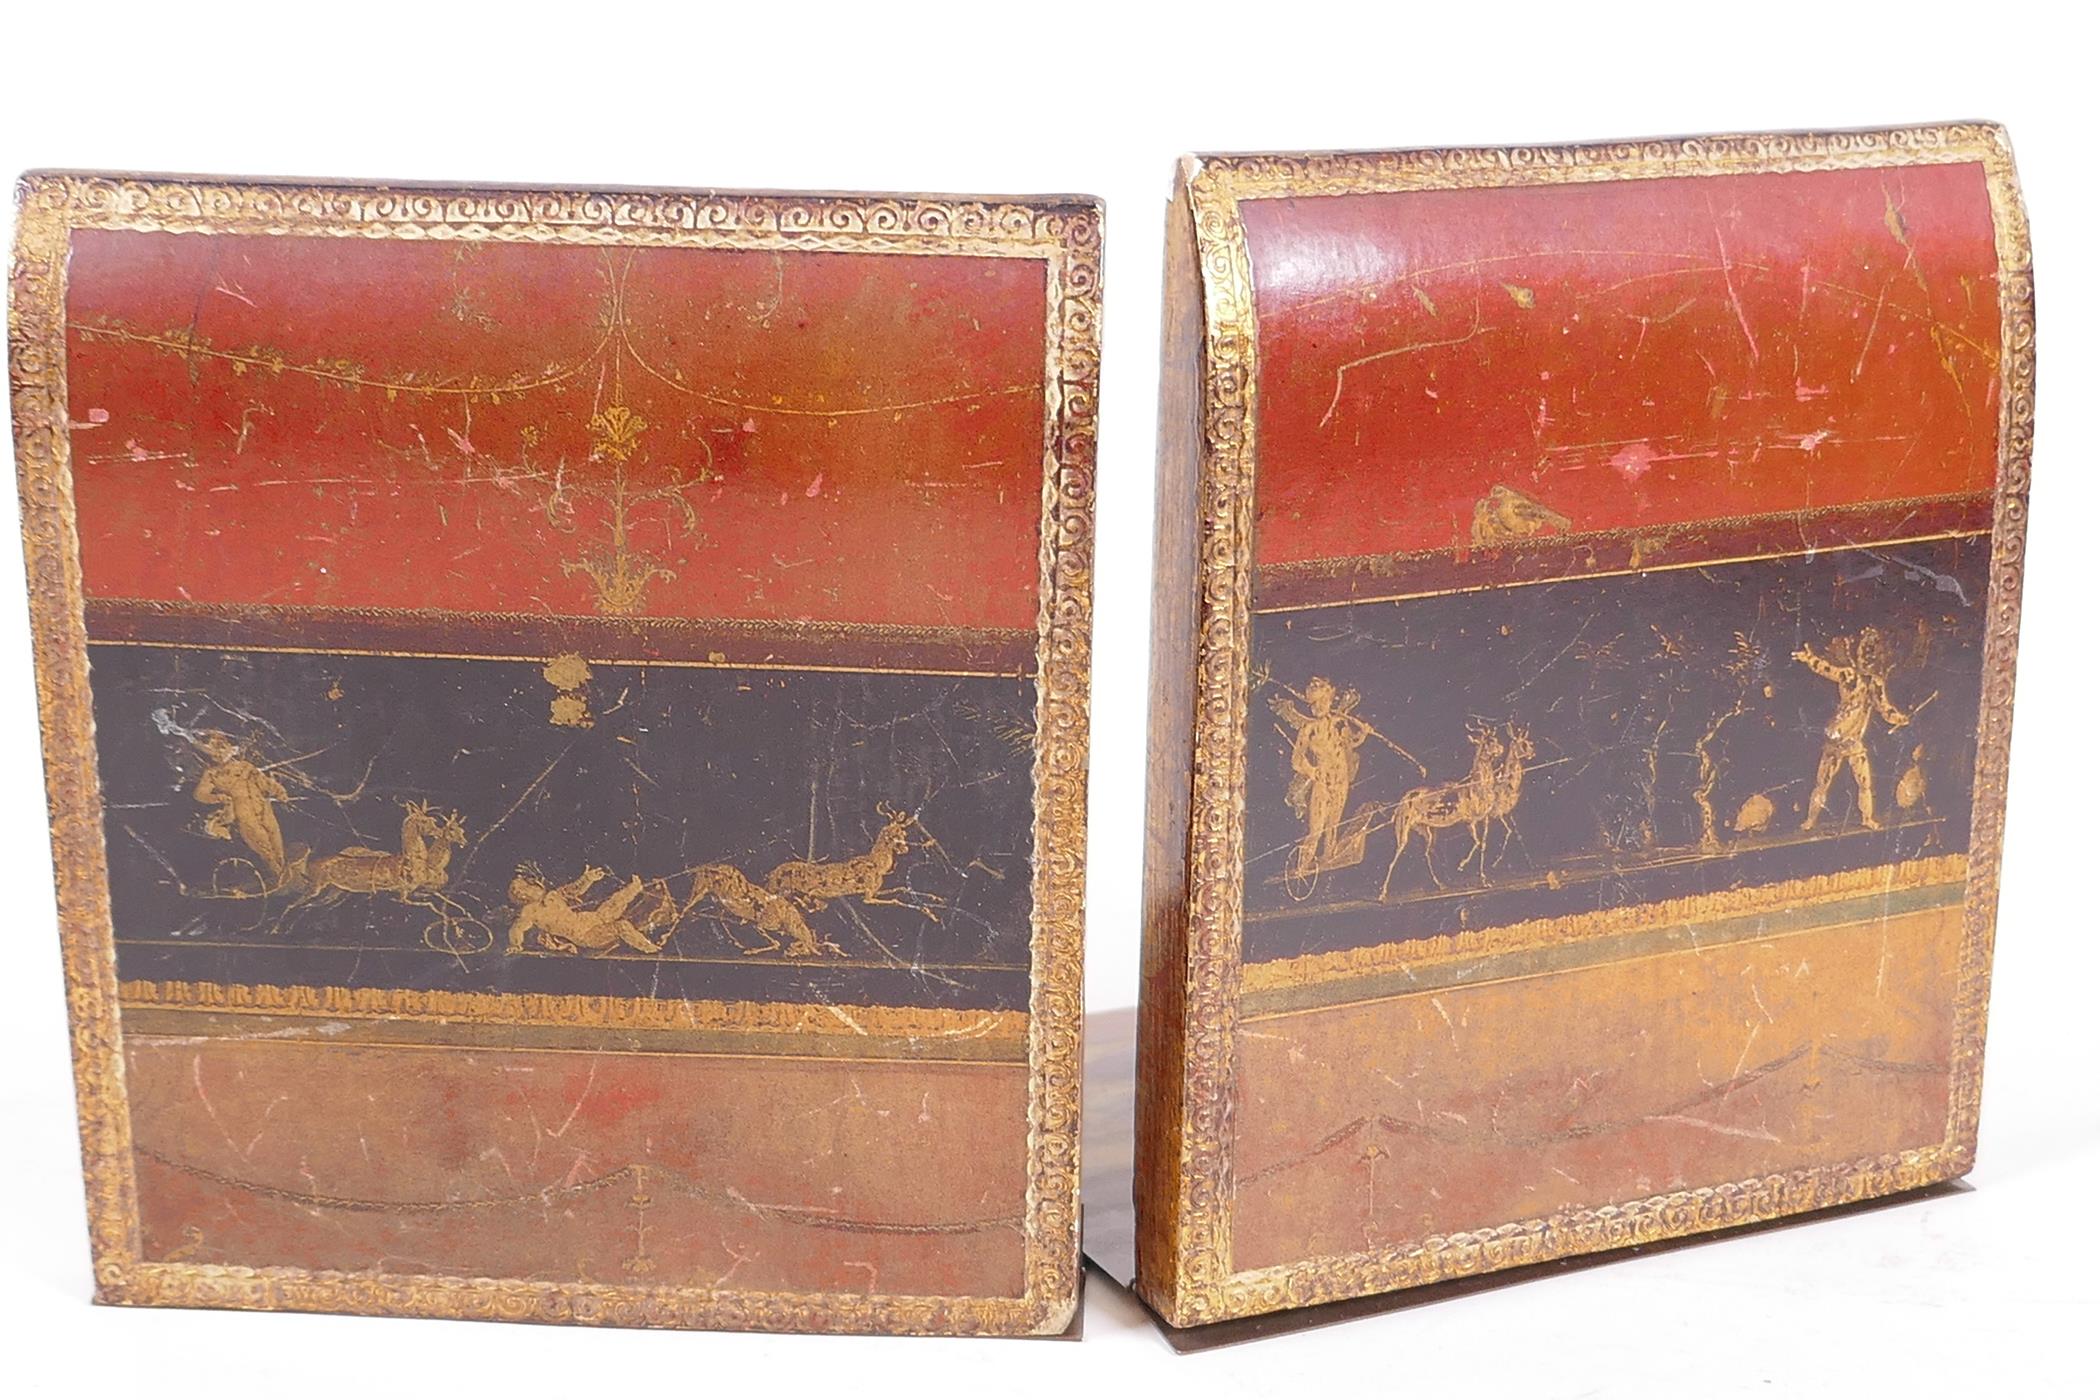 A pair of wood, leather and brass bookends, the wooden ends leather bound in the form of books